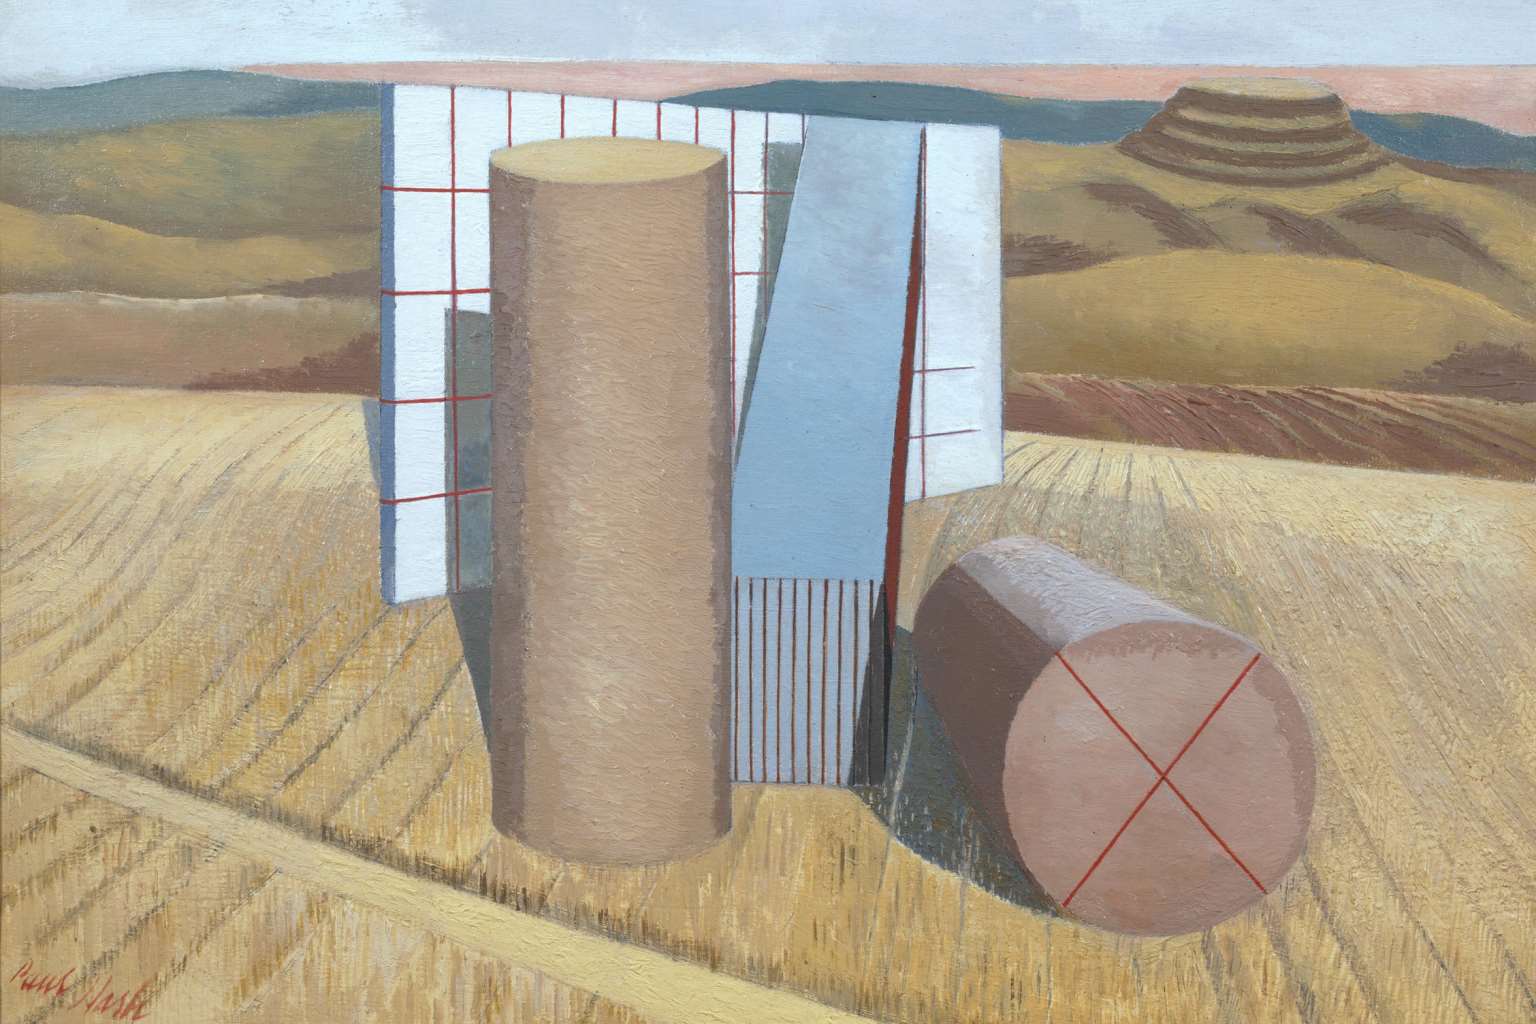 Equivalents for the Megaliths (1935) by Paul Nash. Supplied by Tate Britain